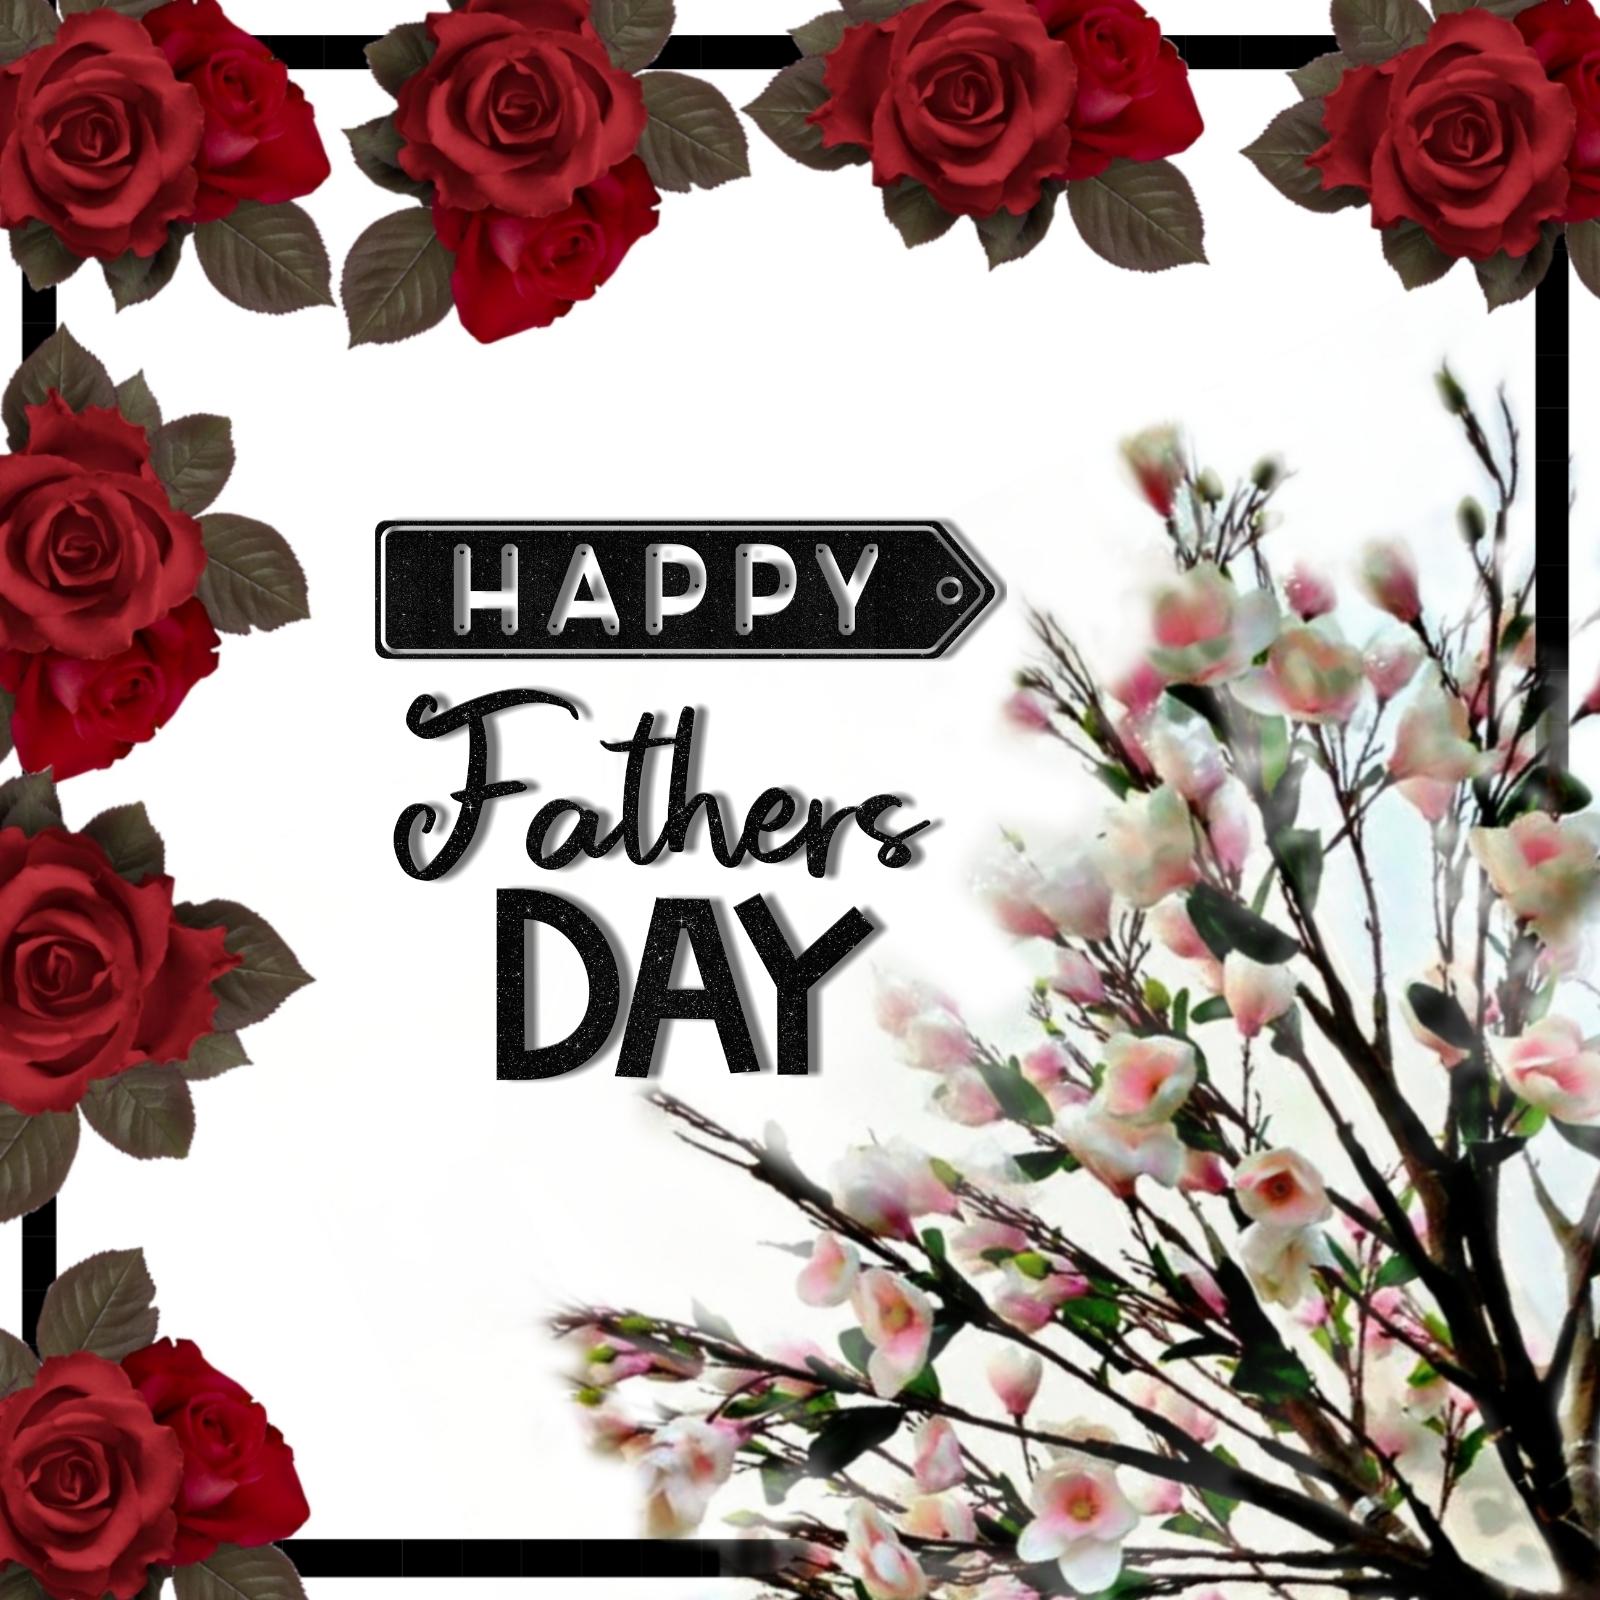 Happy Fathers Day Images Hd